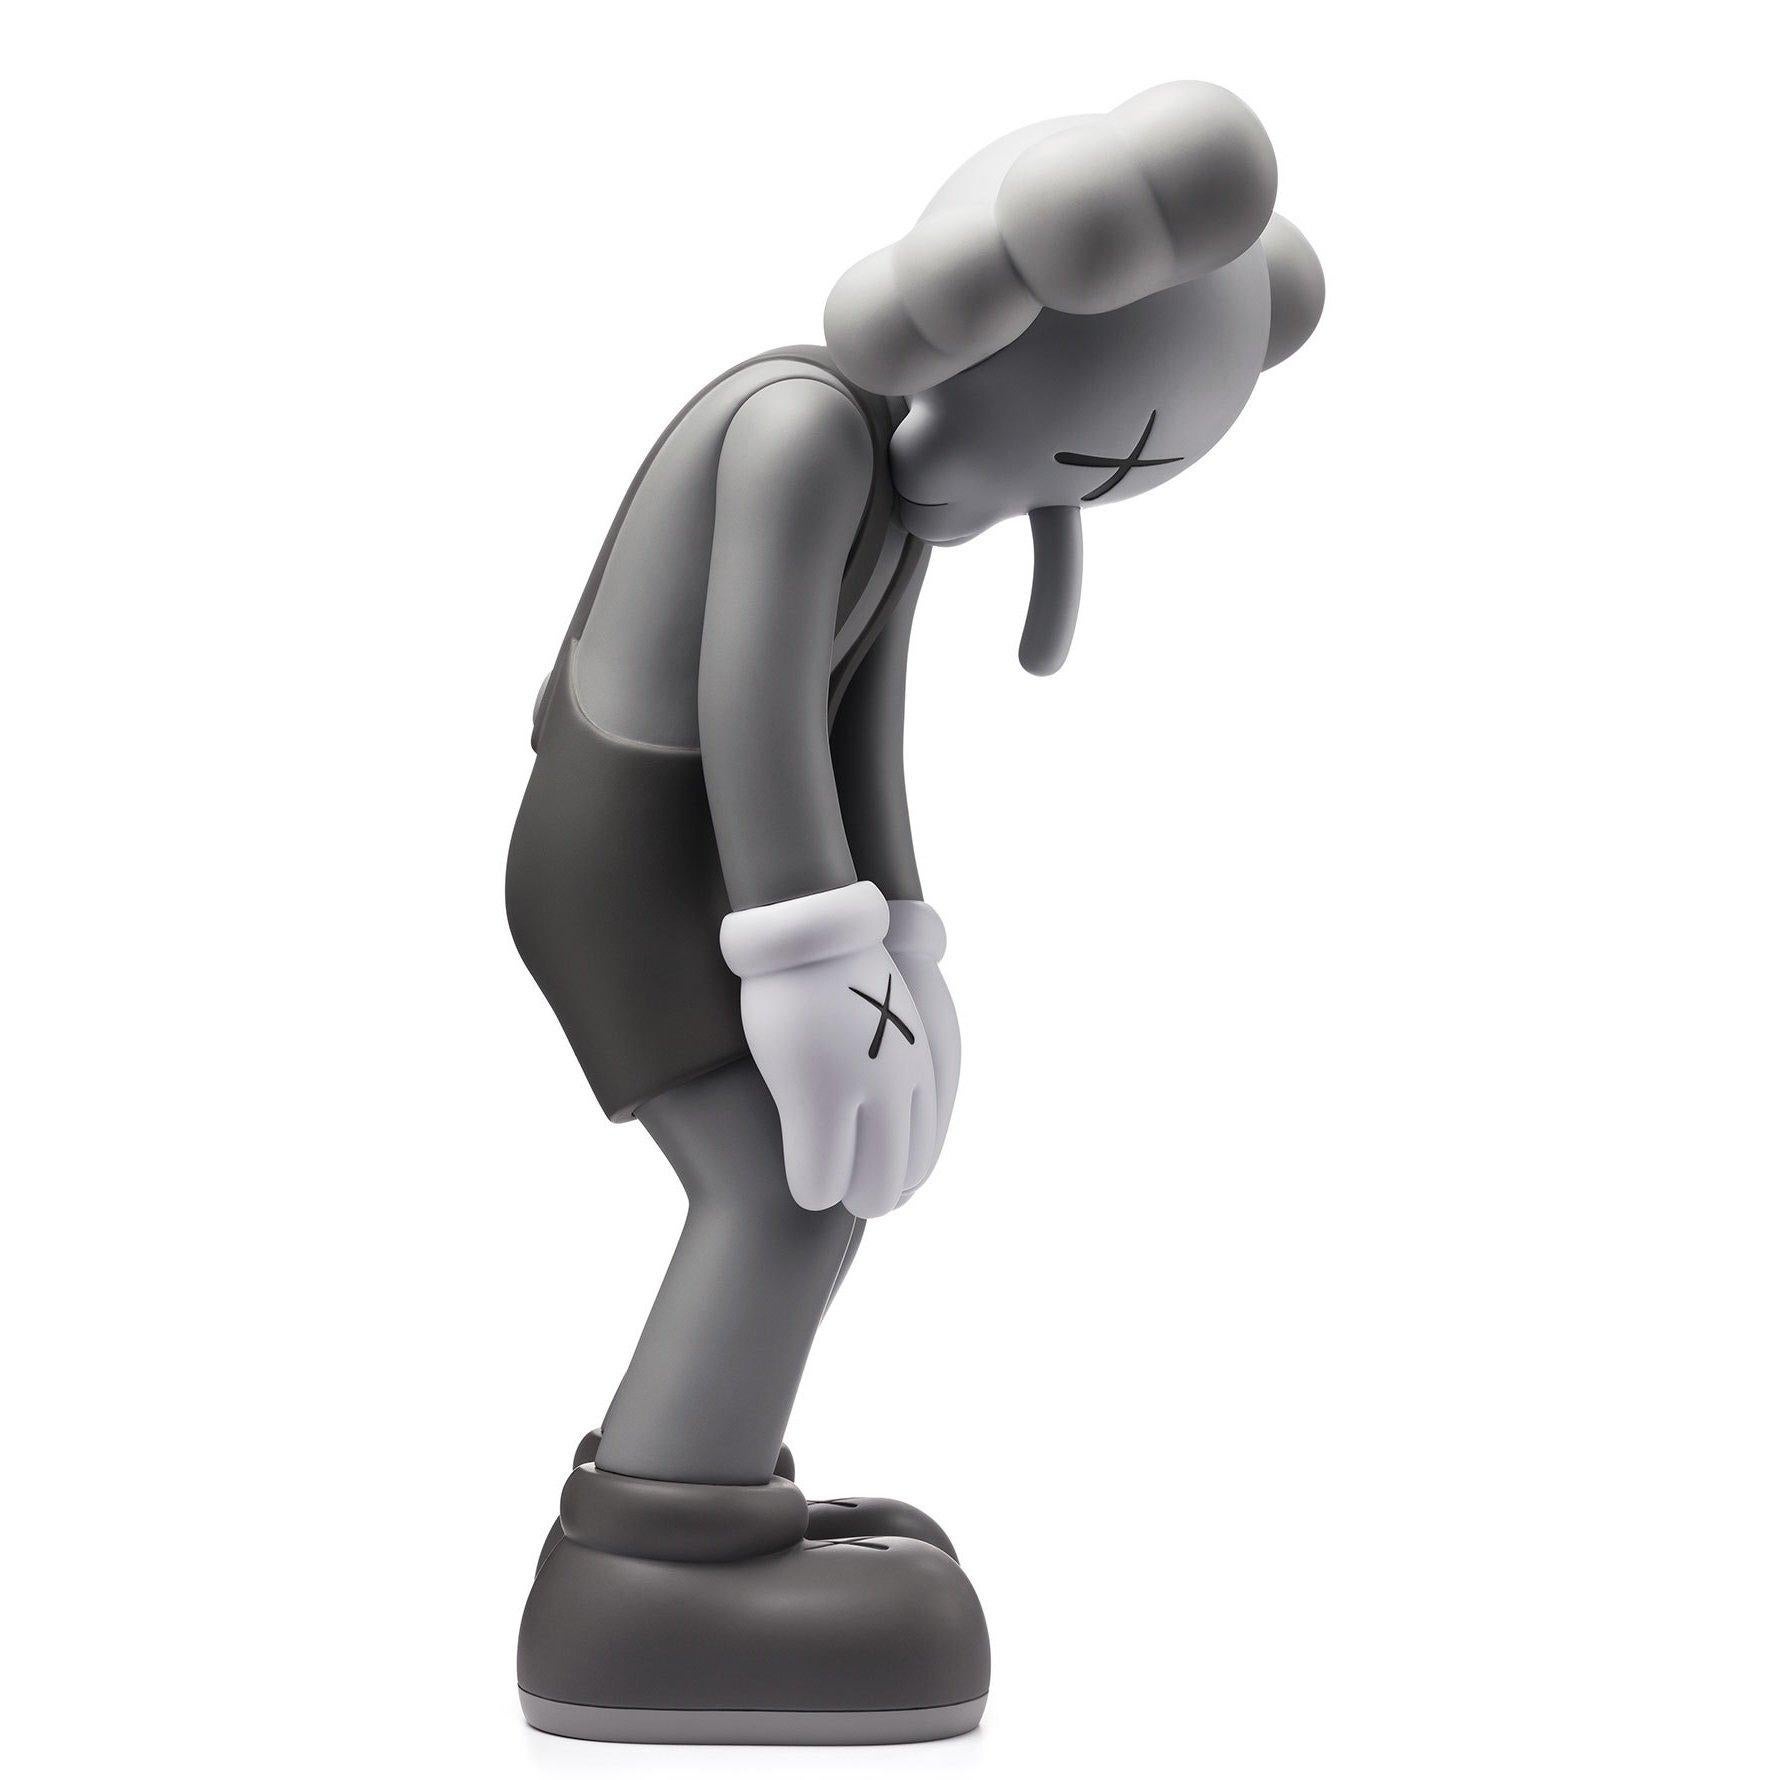 Small Lie (Grey)
Date of creation: 2017
Medium: Sculpture
Media: Vinyl
Edition: Unknown and sold out
Size: 27.5 x 12.3 x 13 cm
Observations: Vinyl sculpture published in 2017 by KAWS/ORIGINALFAKE & Medicom Toys. Sent inside its original box. 
KAWS